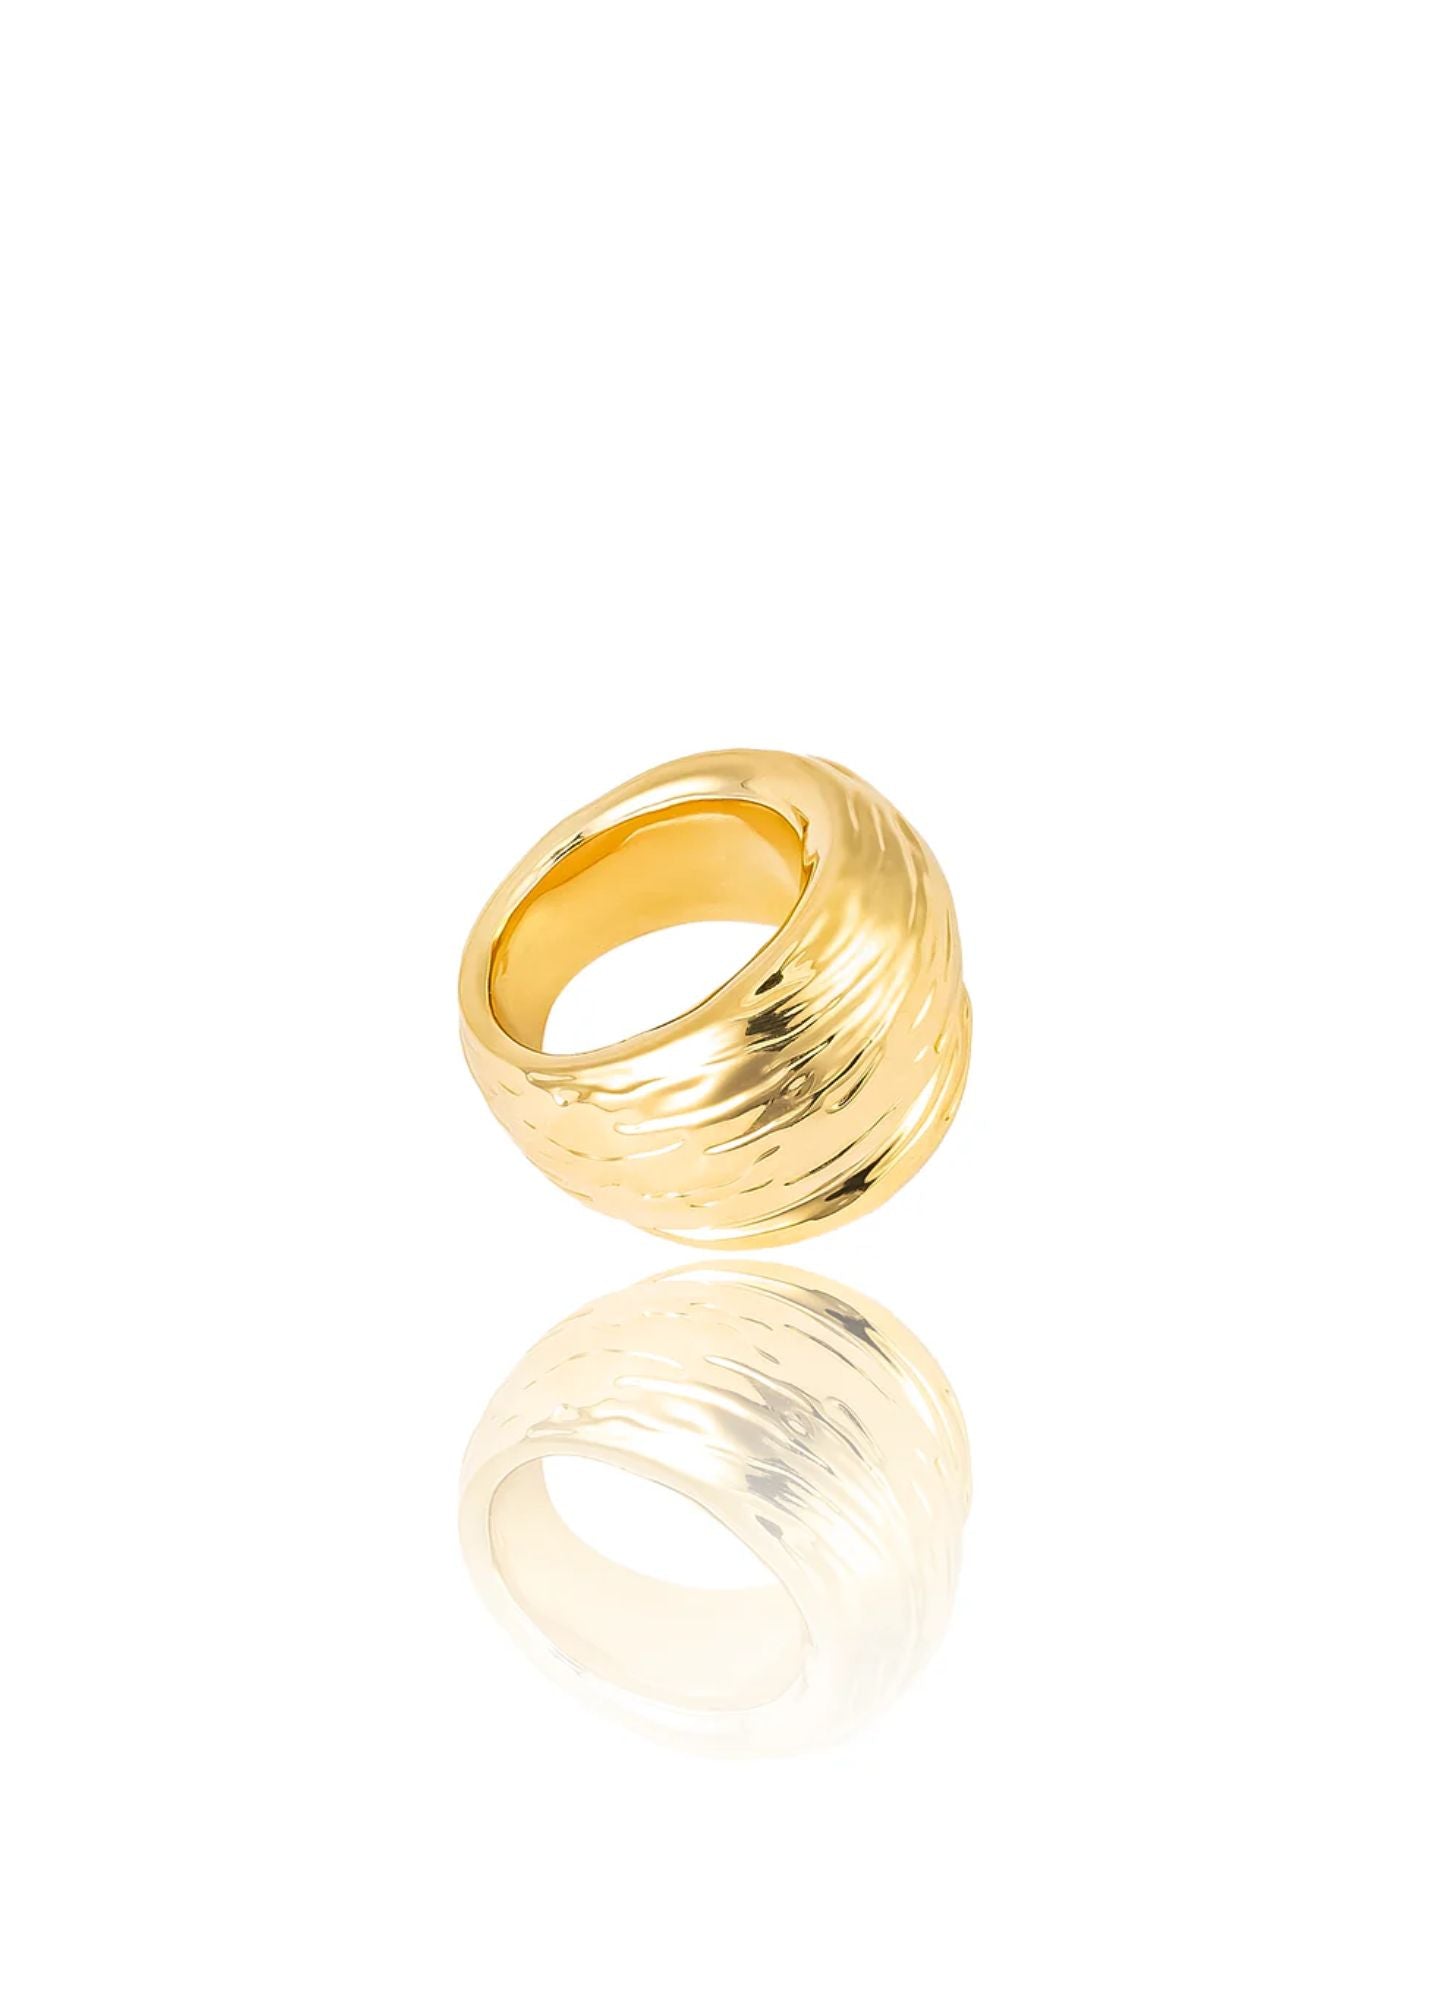 Maximalist Thick Croissant Dome Ring in 18K Gold Filled